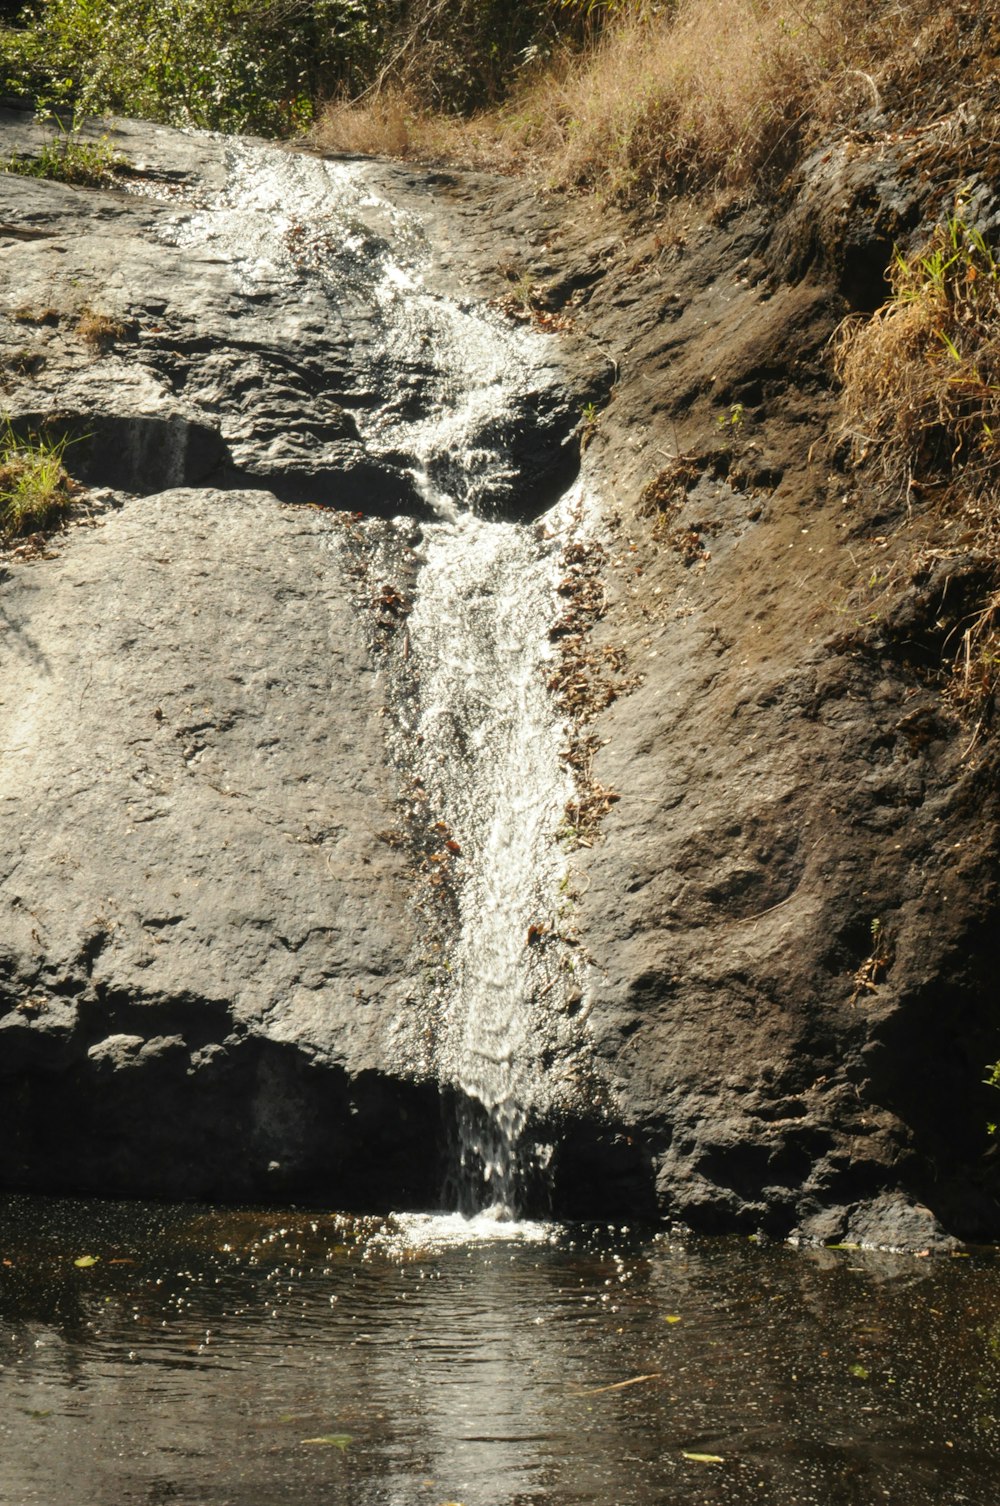 water falls on brown rocky mountain